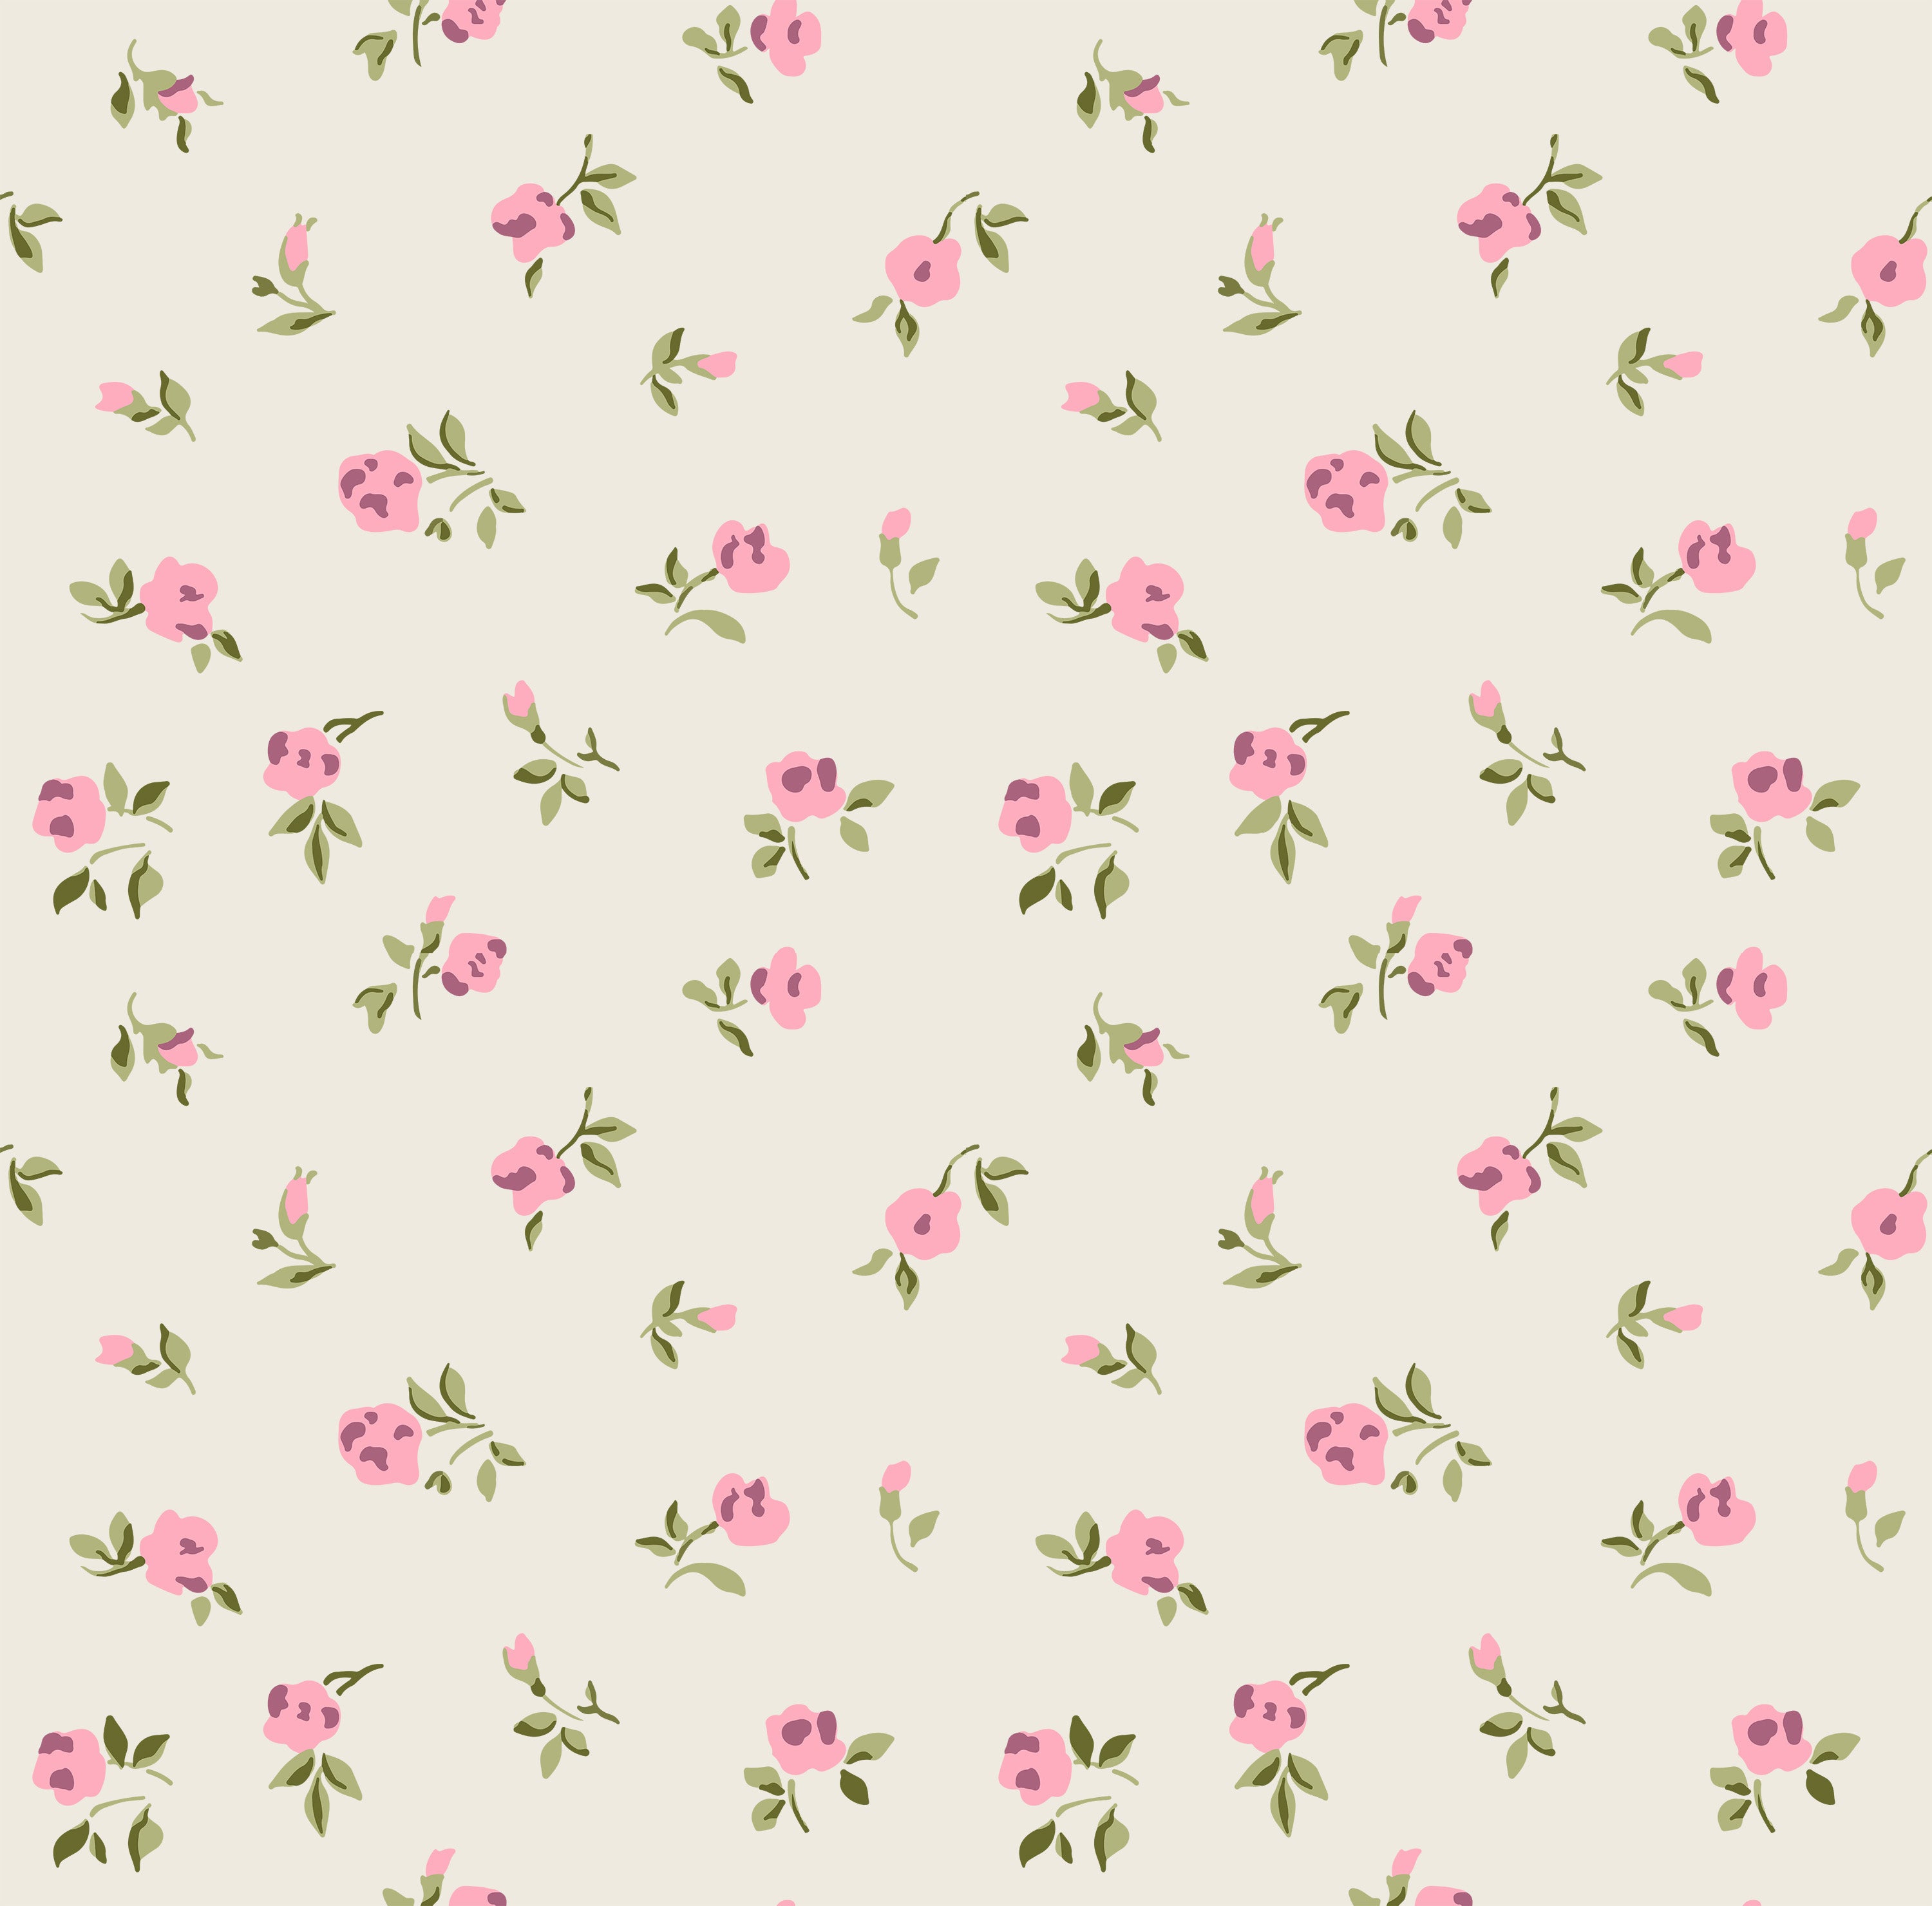 Close-up view of the Flora Wallpaper, showcasing a delicate pattern of small pink flowers and green leaves distributed evenly across a soft cream backdrop. This wallpaper design exudes charm and adds a fresh, botanical vibe to any room.